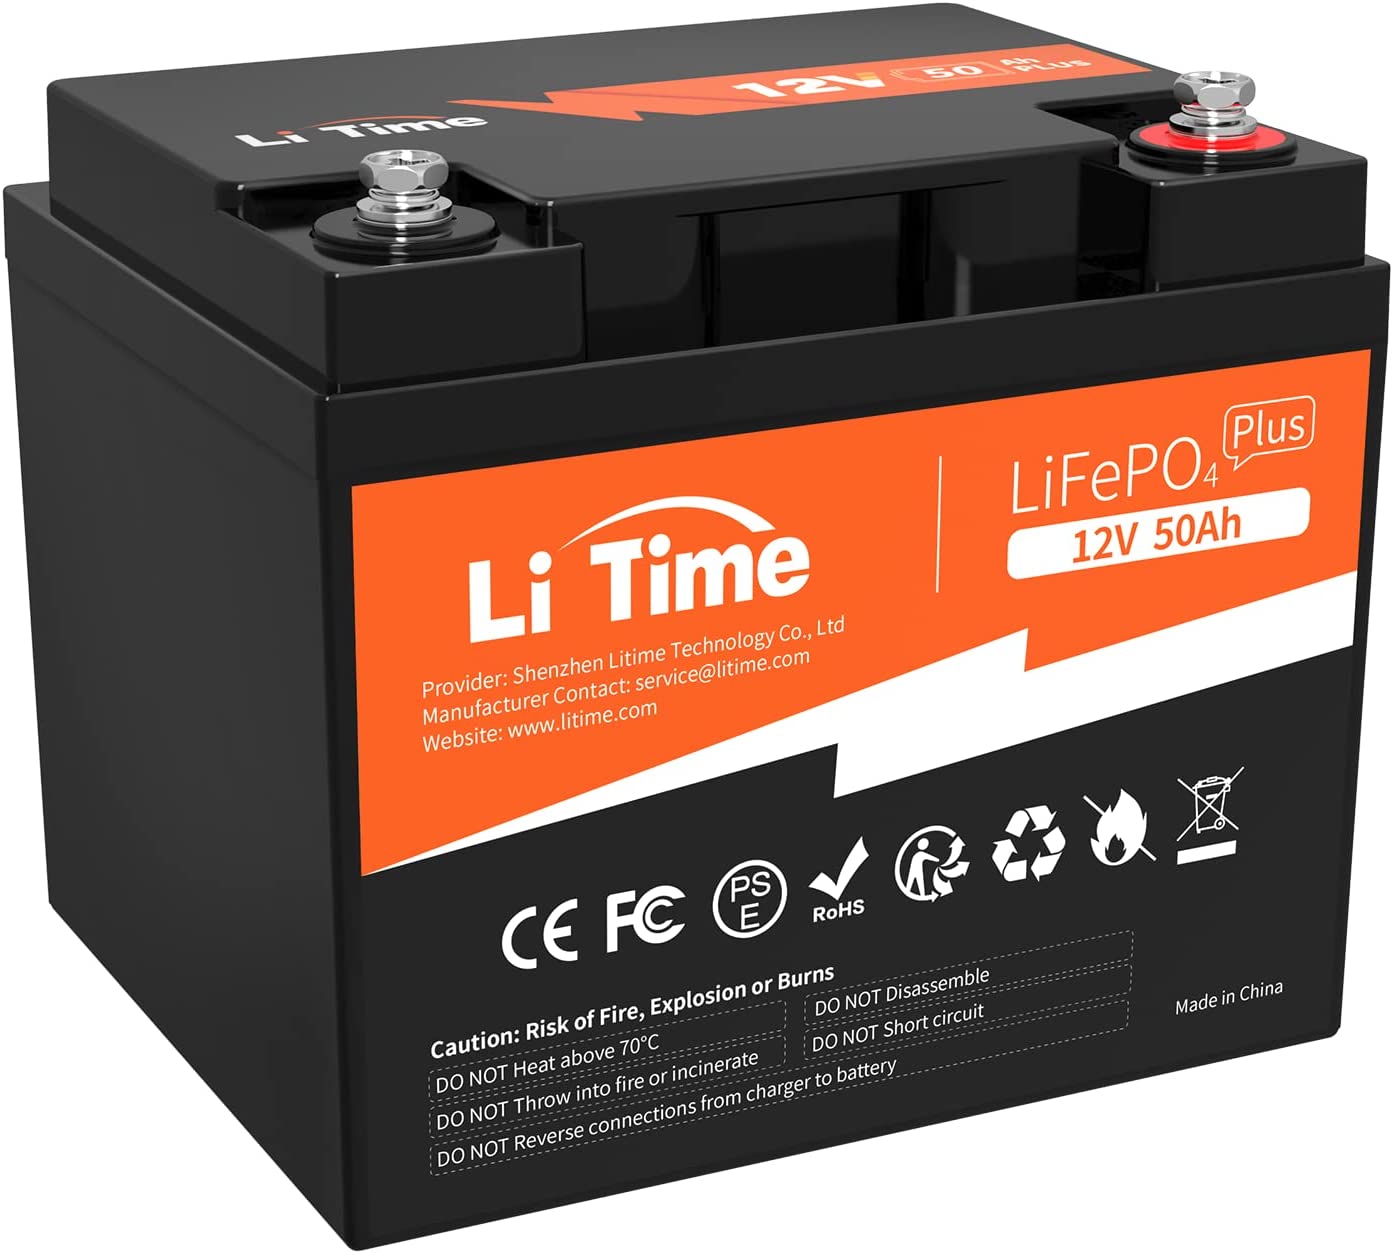 LiTime 12V 50Ah Lithium LiFePO4 Battery Built in BMS 10 Years Lifetime 4000 Cycles Output Power 640W Perfect for Boat Marine Trolling motor Camping Riding Mower